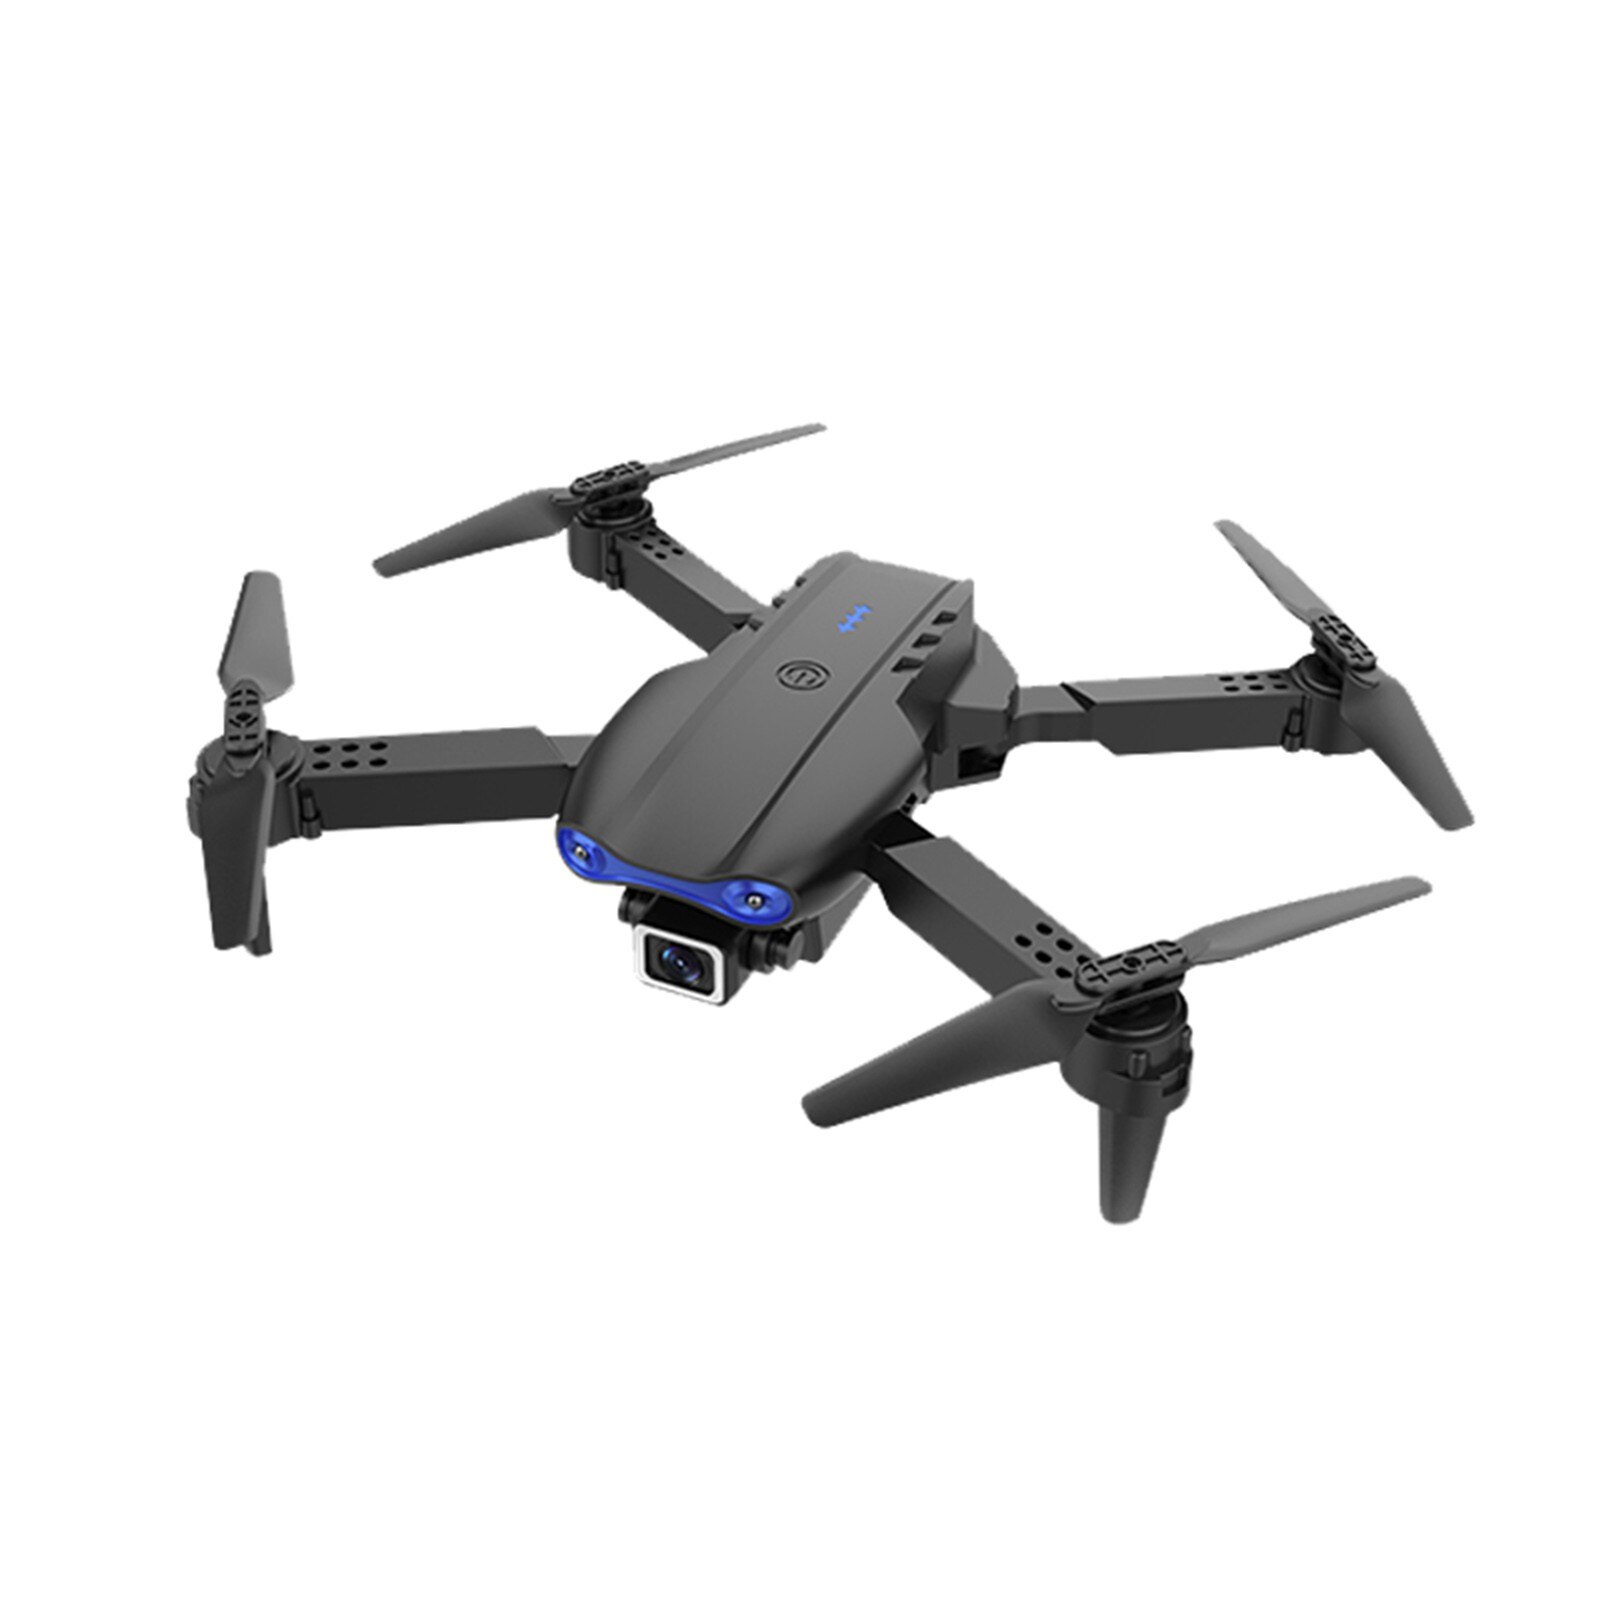 Mini-drone 4k Hd Dual Camera Wifi Fpv Smart Selfie Rc Uav Foldable Helicopter Profesional Photography Quadcopter Rc Dron Toys